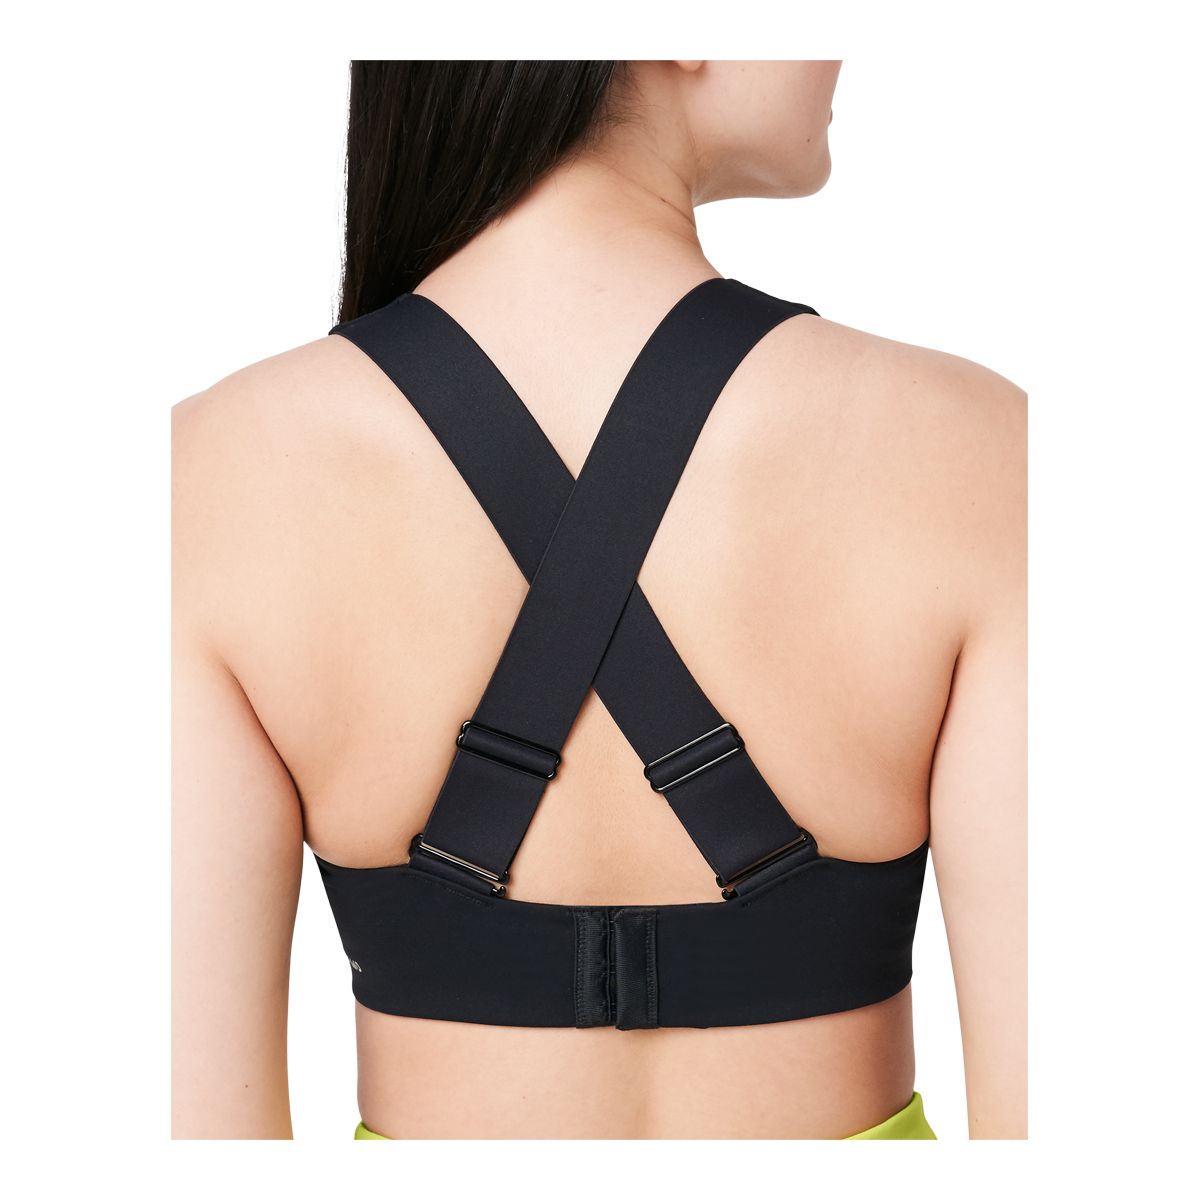 Womens Shock Proof Sports Sports Underwear Women With Thin Shoulder Straps,  Comfortable Back, And Yoga Vibes From Yqlchpchx888, $14.97